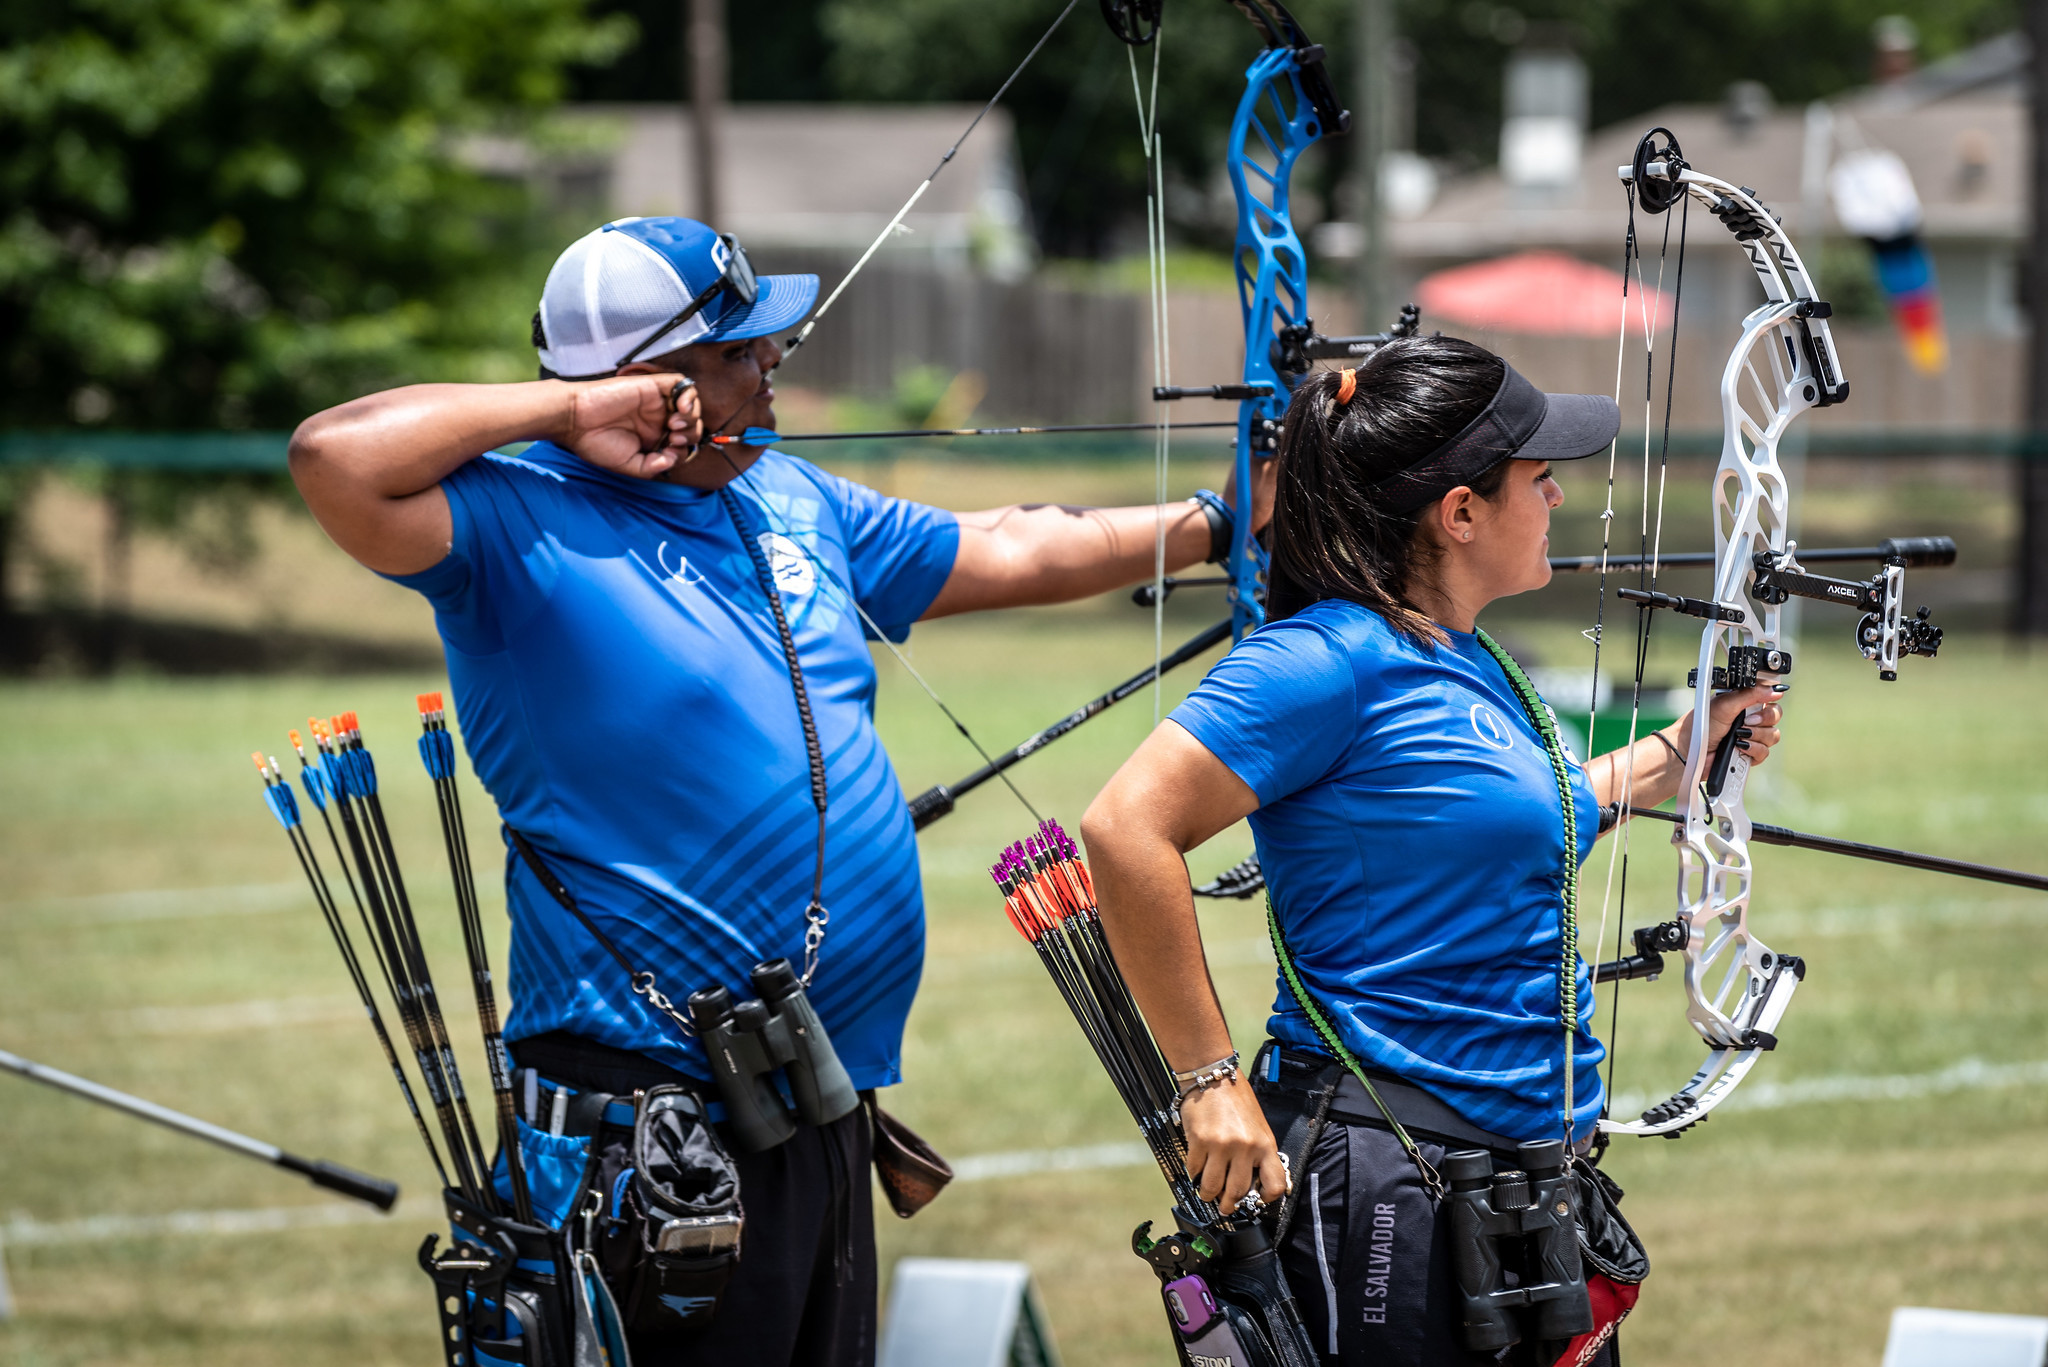 El Salvador failed to beat Colombia in the mixed team compound quarter-fianls event ©The World Games